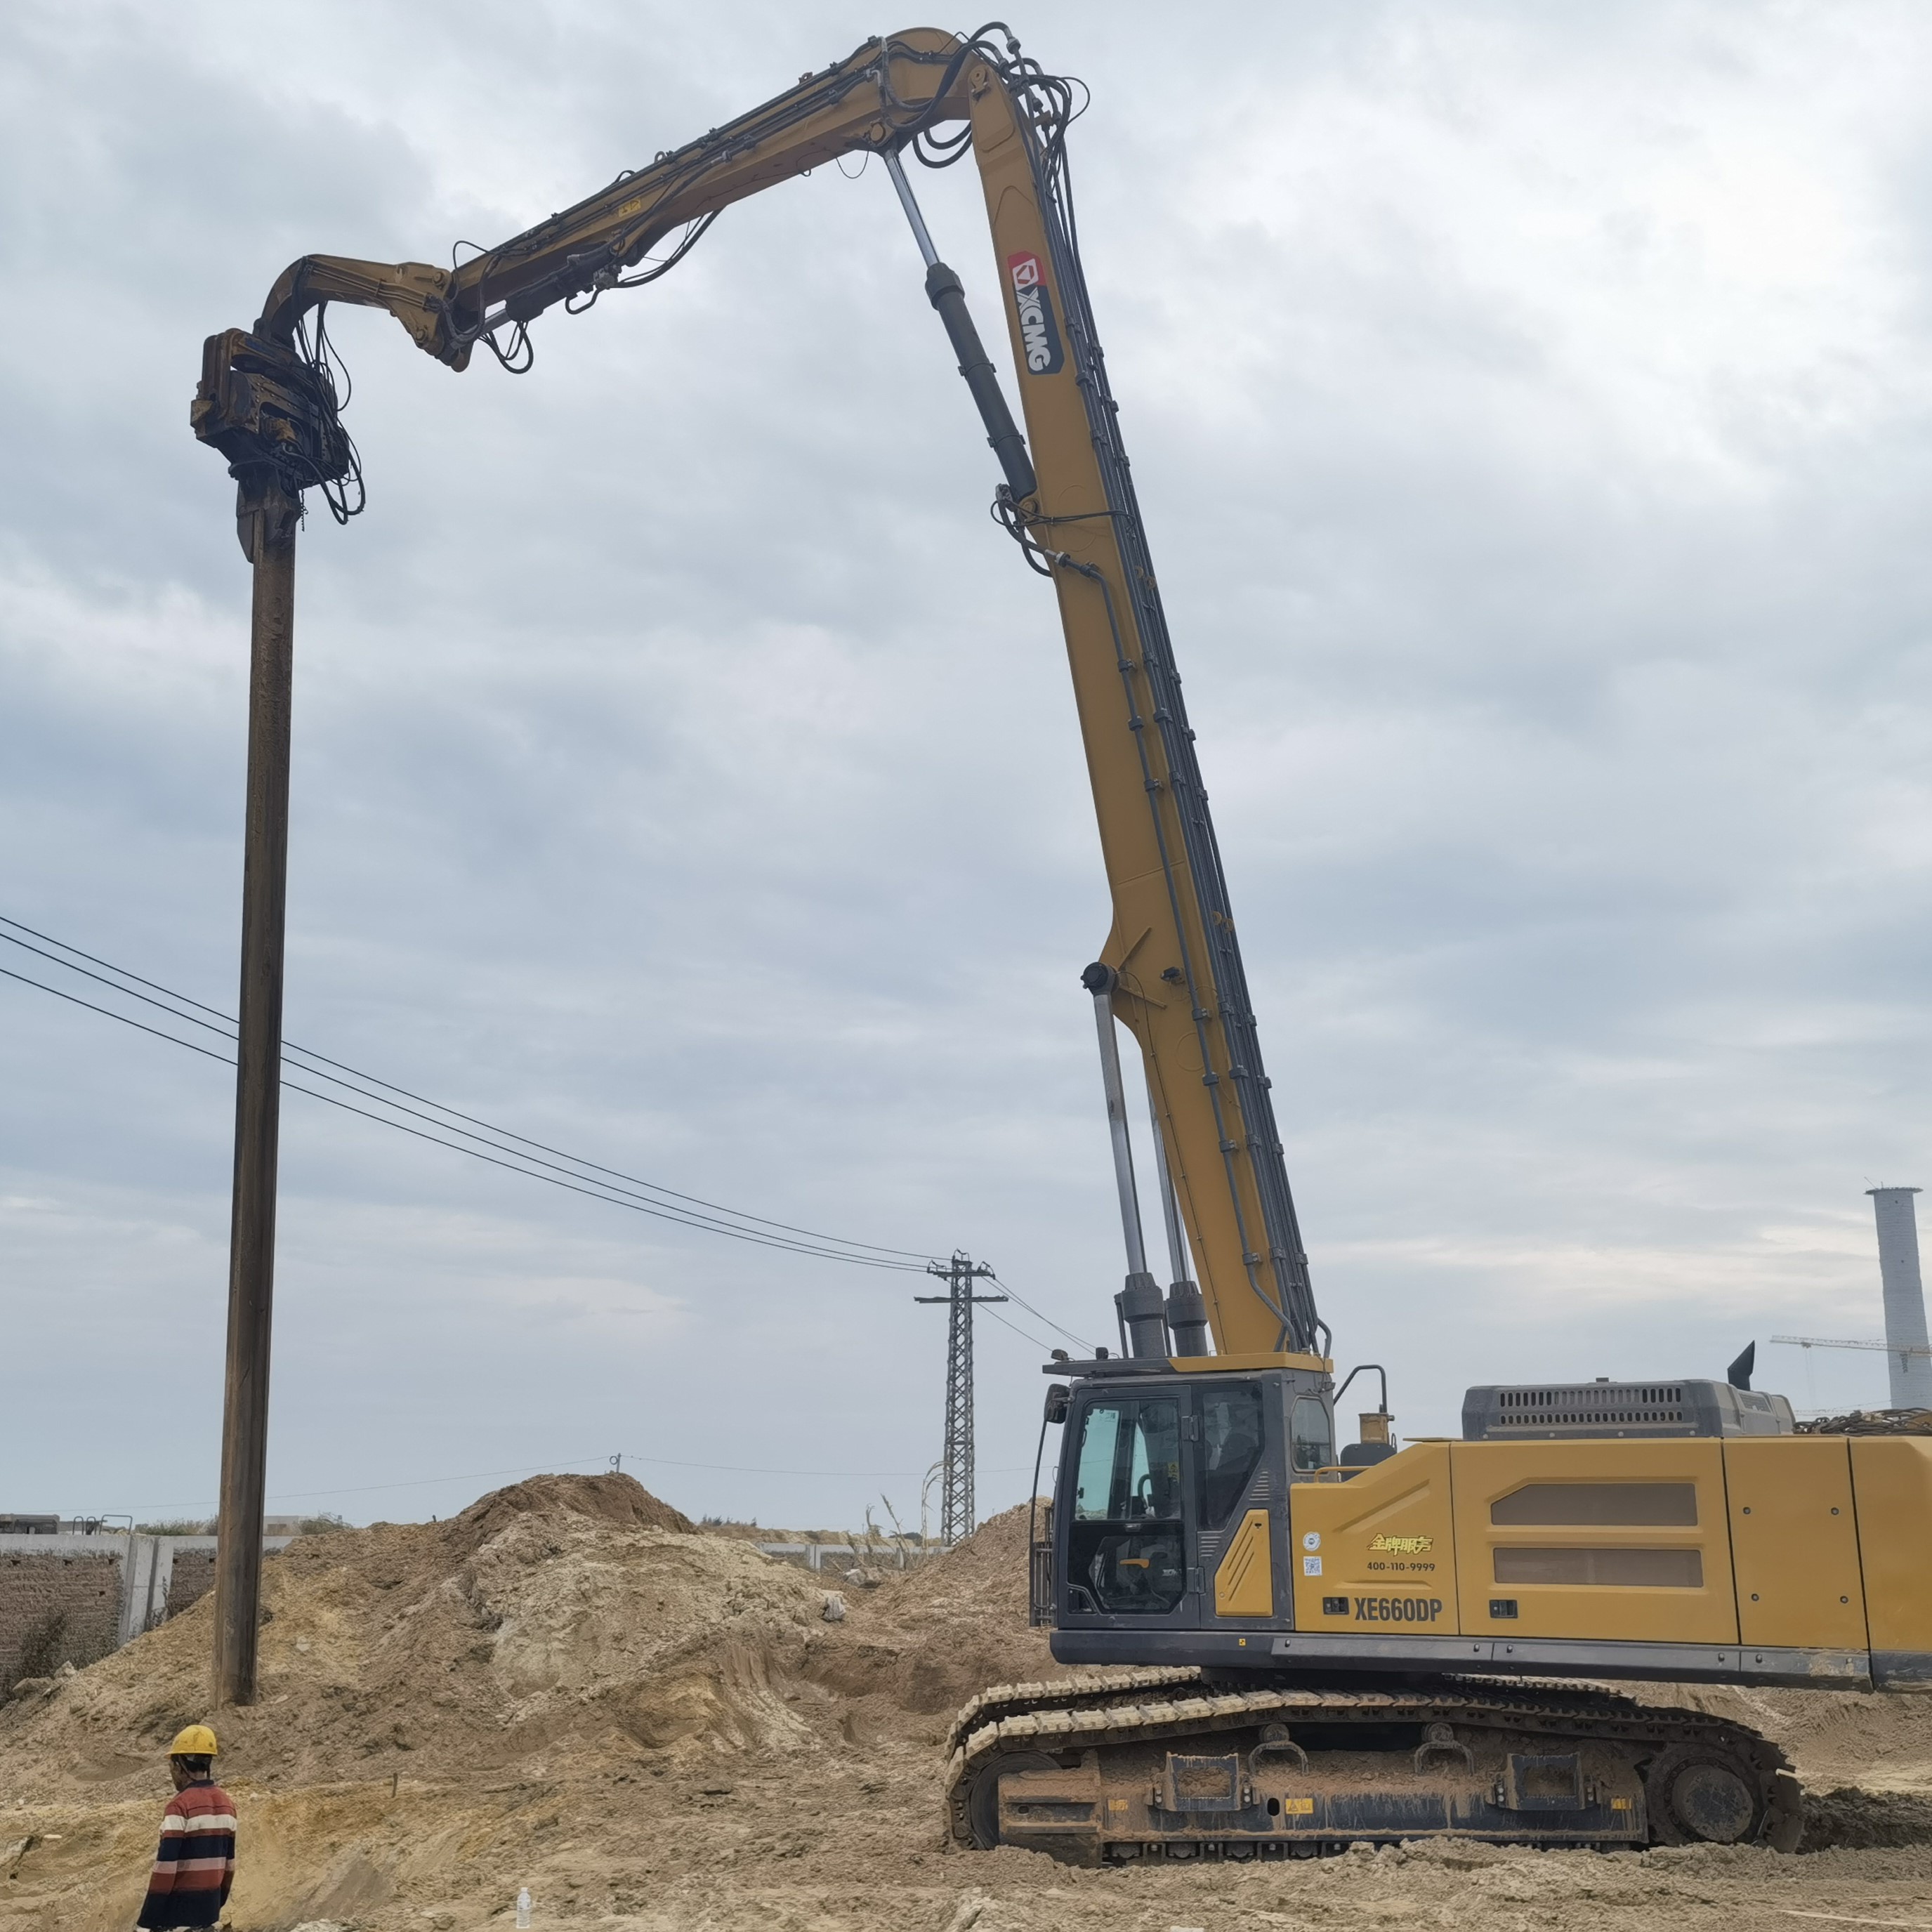 Hydraulic Vibrating Pile Driver RV-250 for 20-25 Ton Excavator